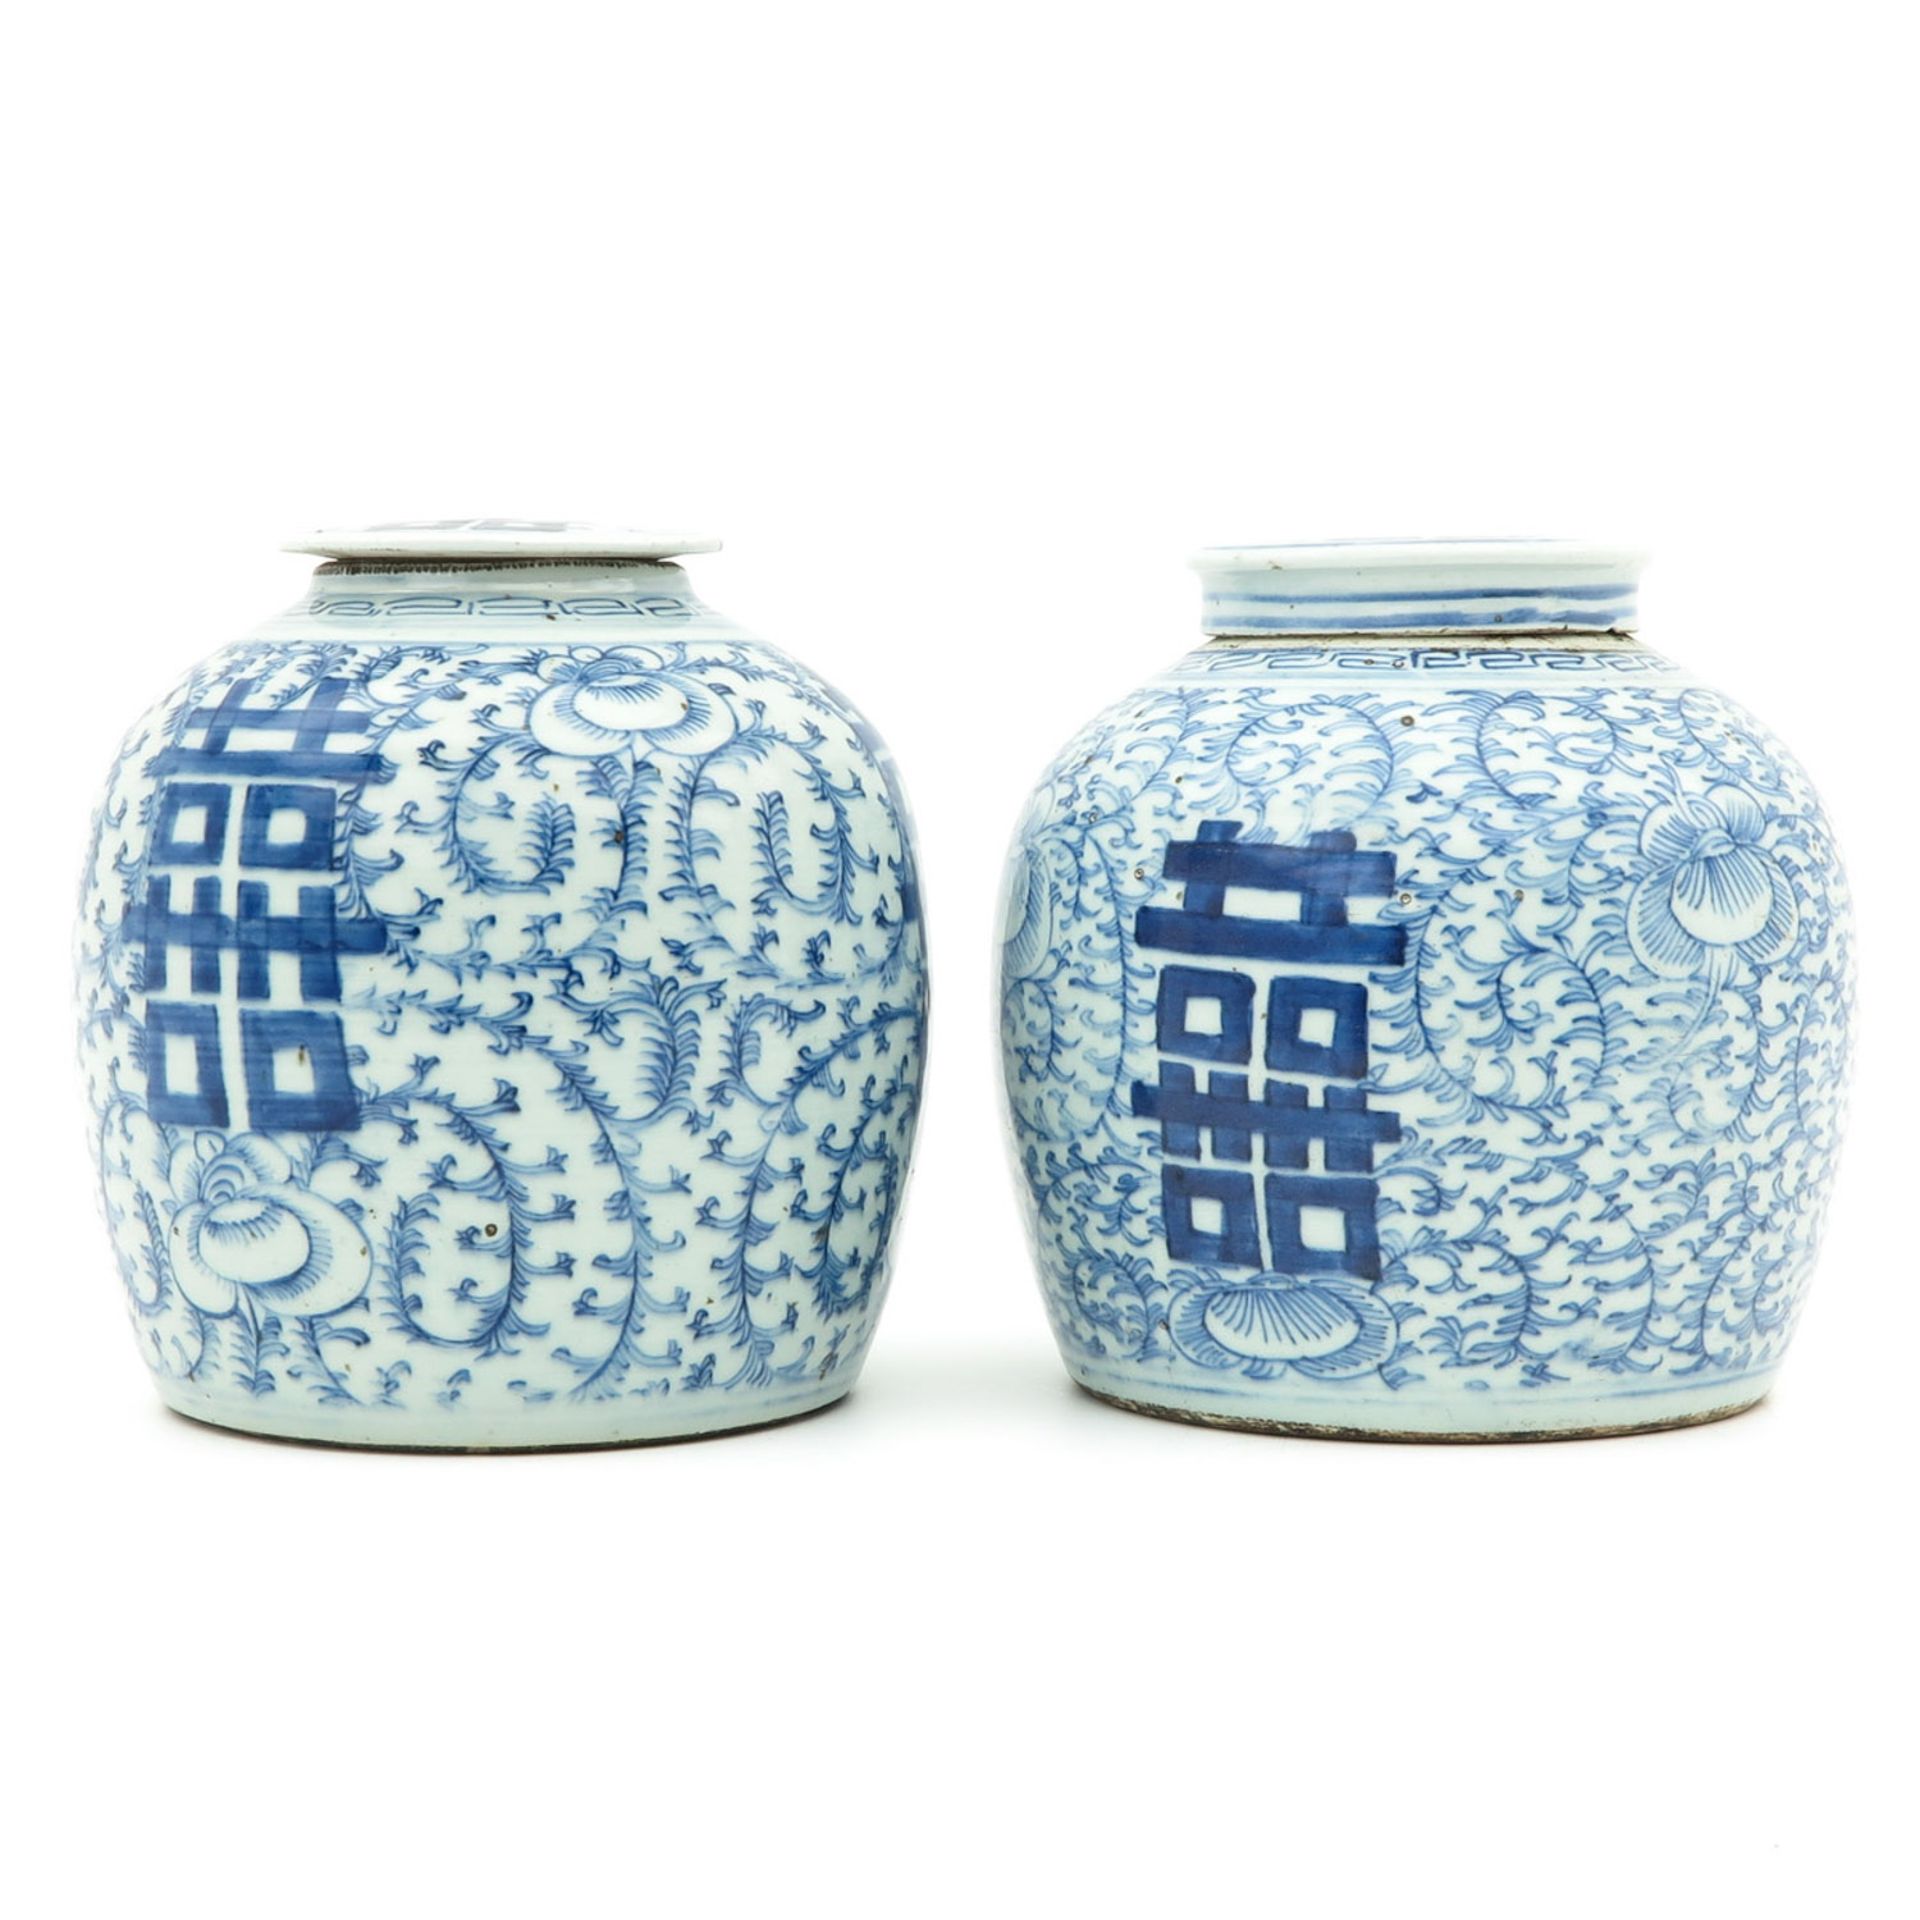 A Pair of Ginger Jars - Image 2 of 10